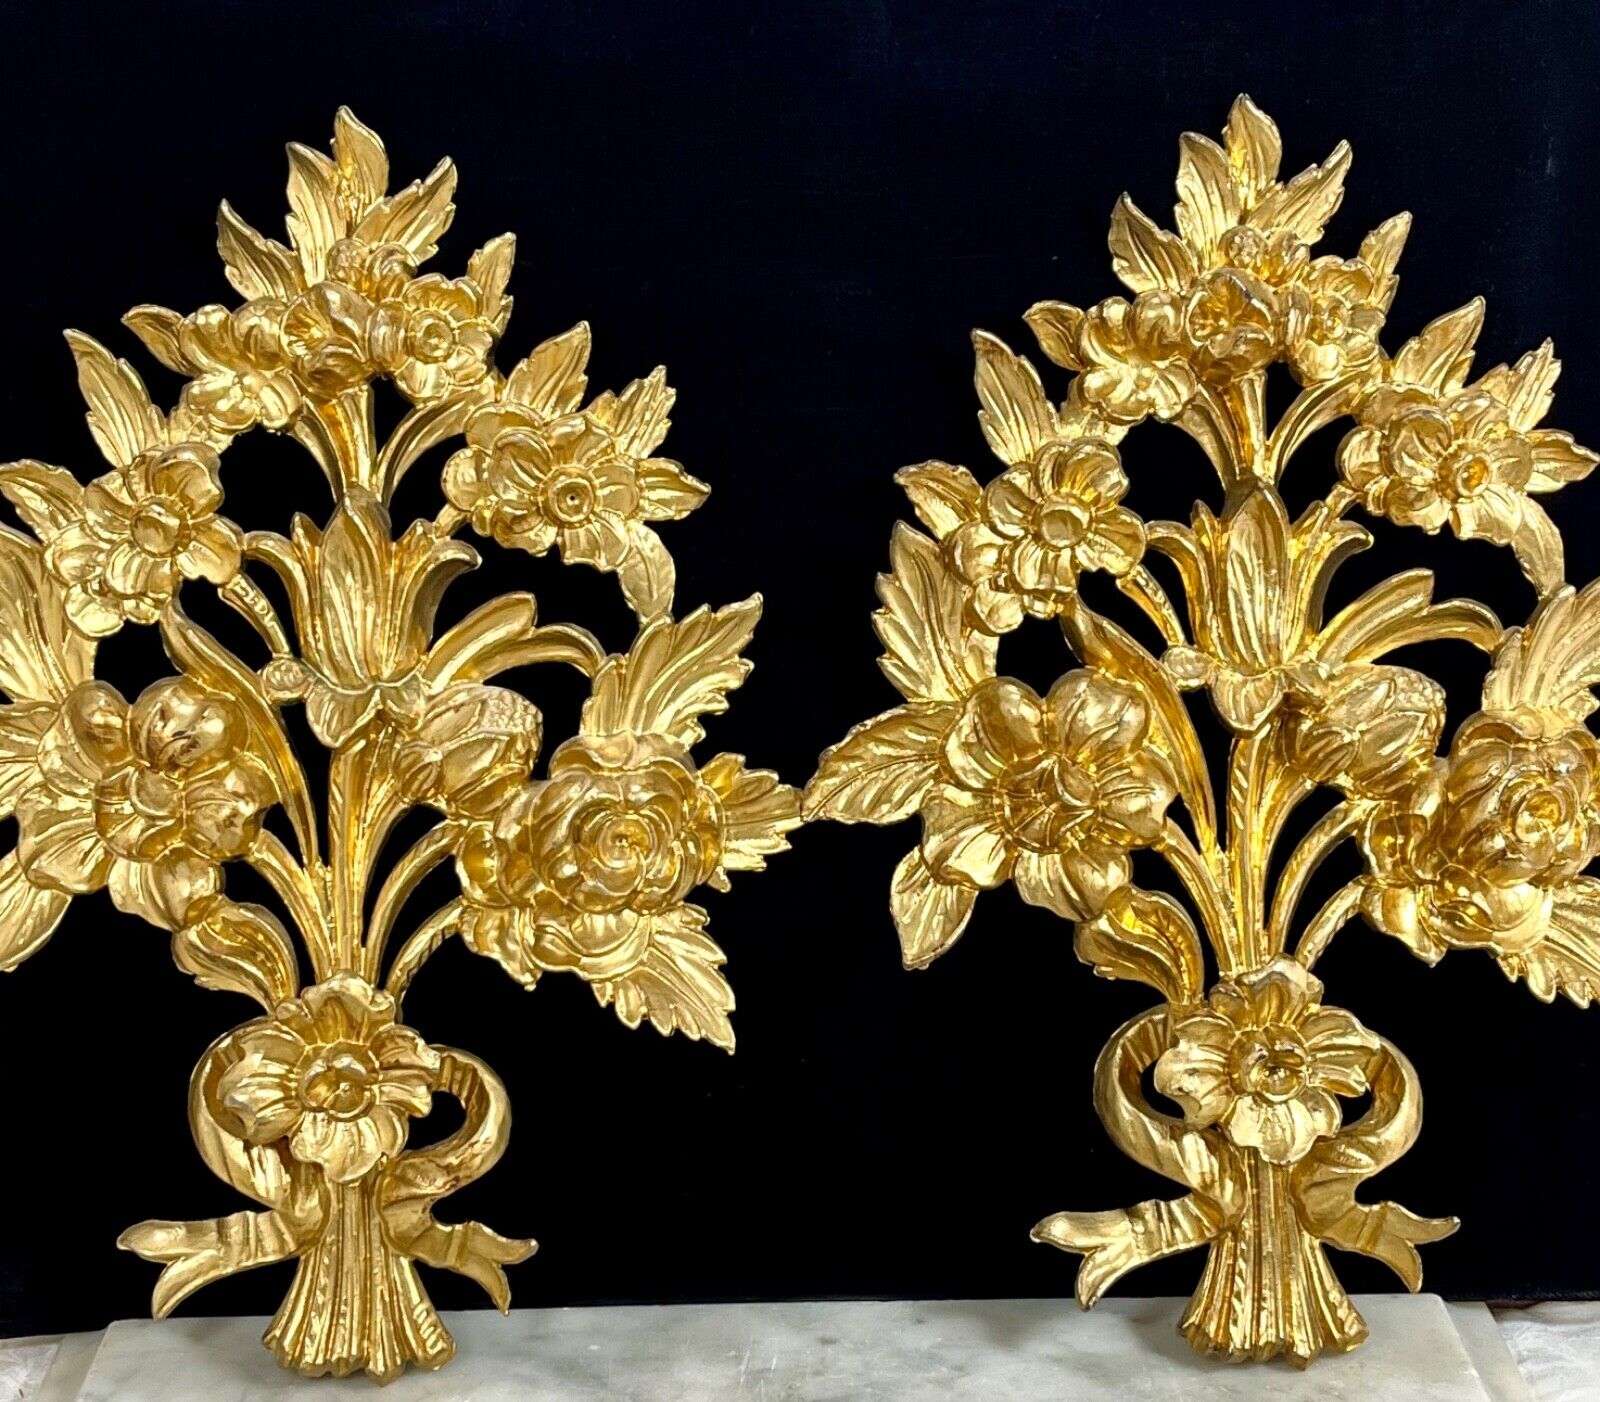 Vintage Italian Gold Carved Ornate Florentine Italy Wall Hanging 15” X 11” Set 2